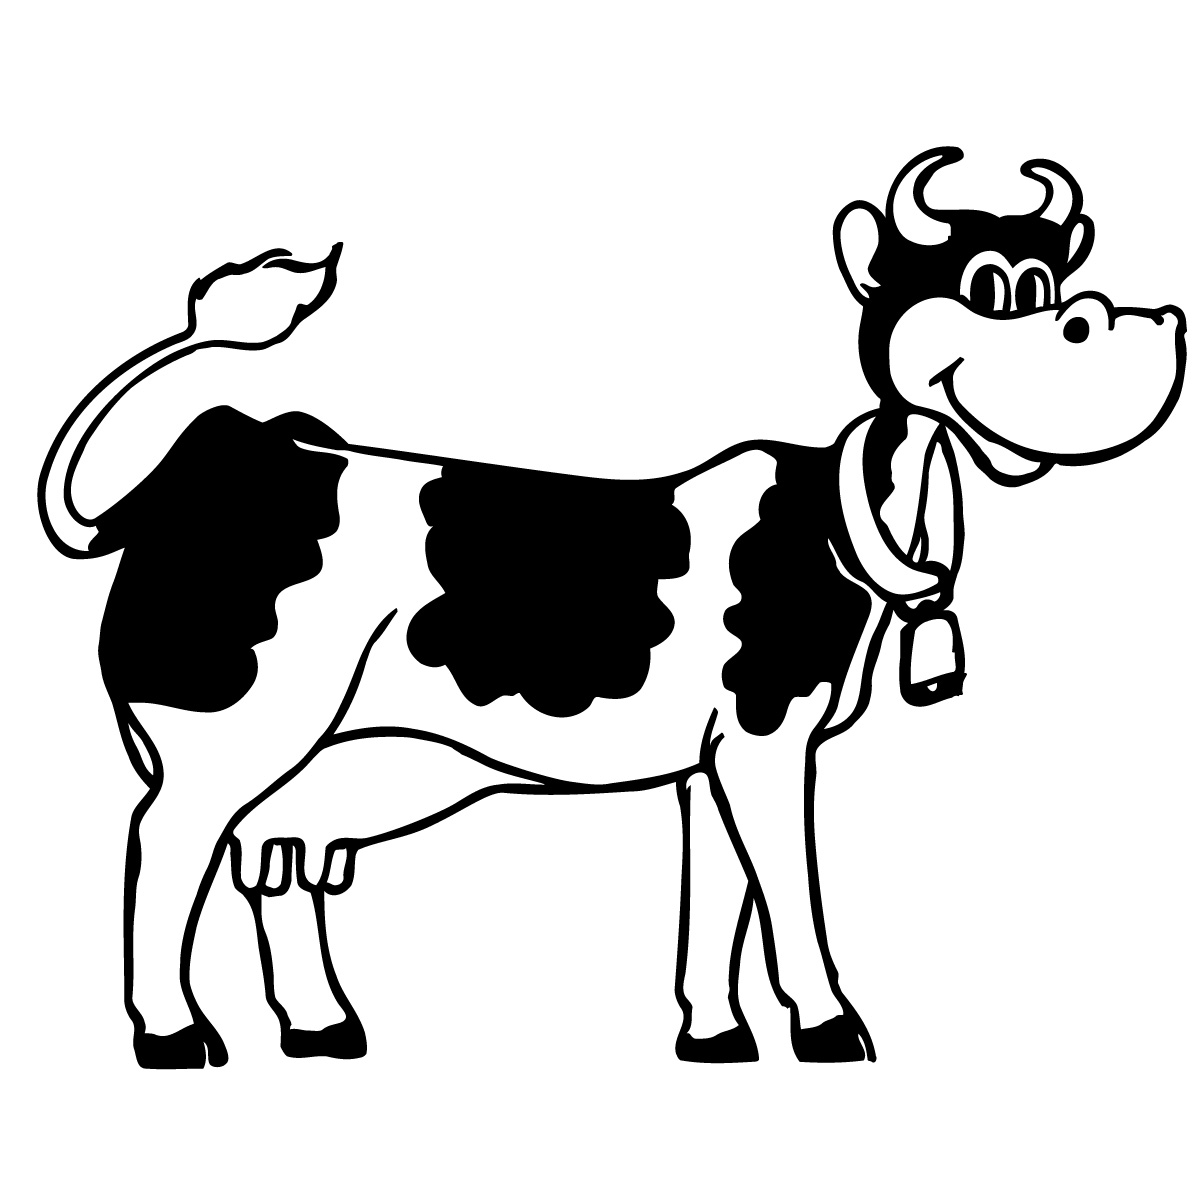 Free Image Of Cows, Download Free Clip Art, Free Clip Art on